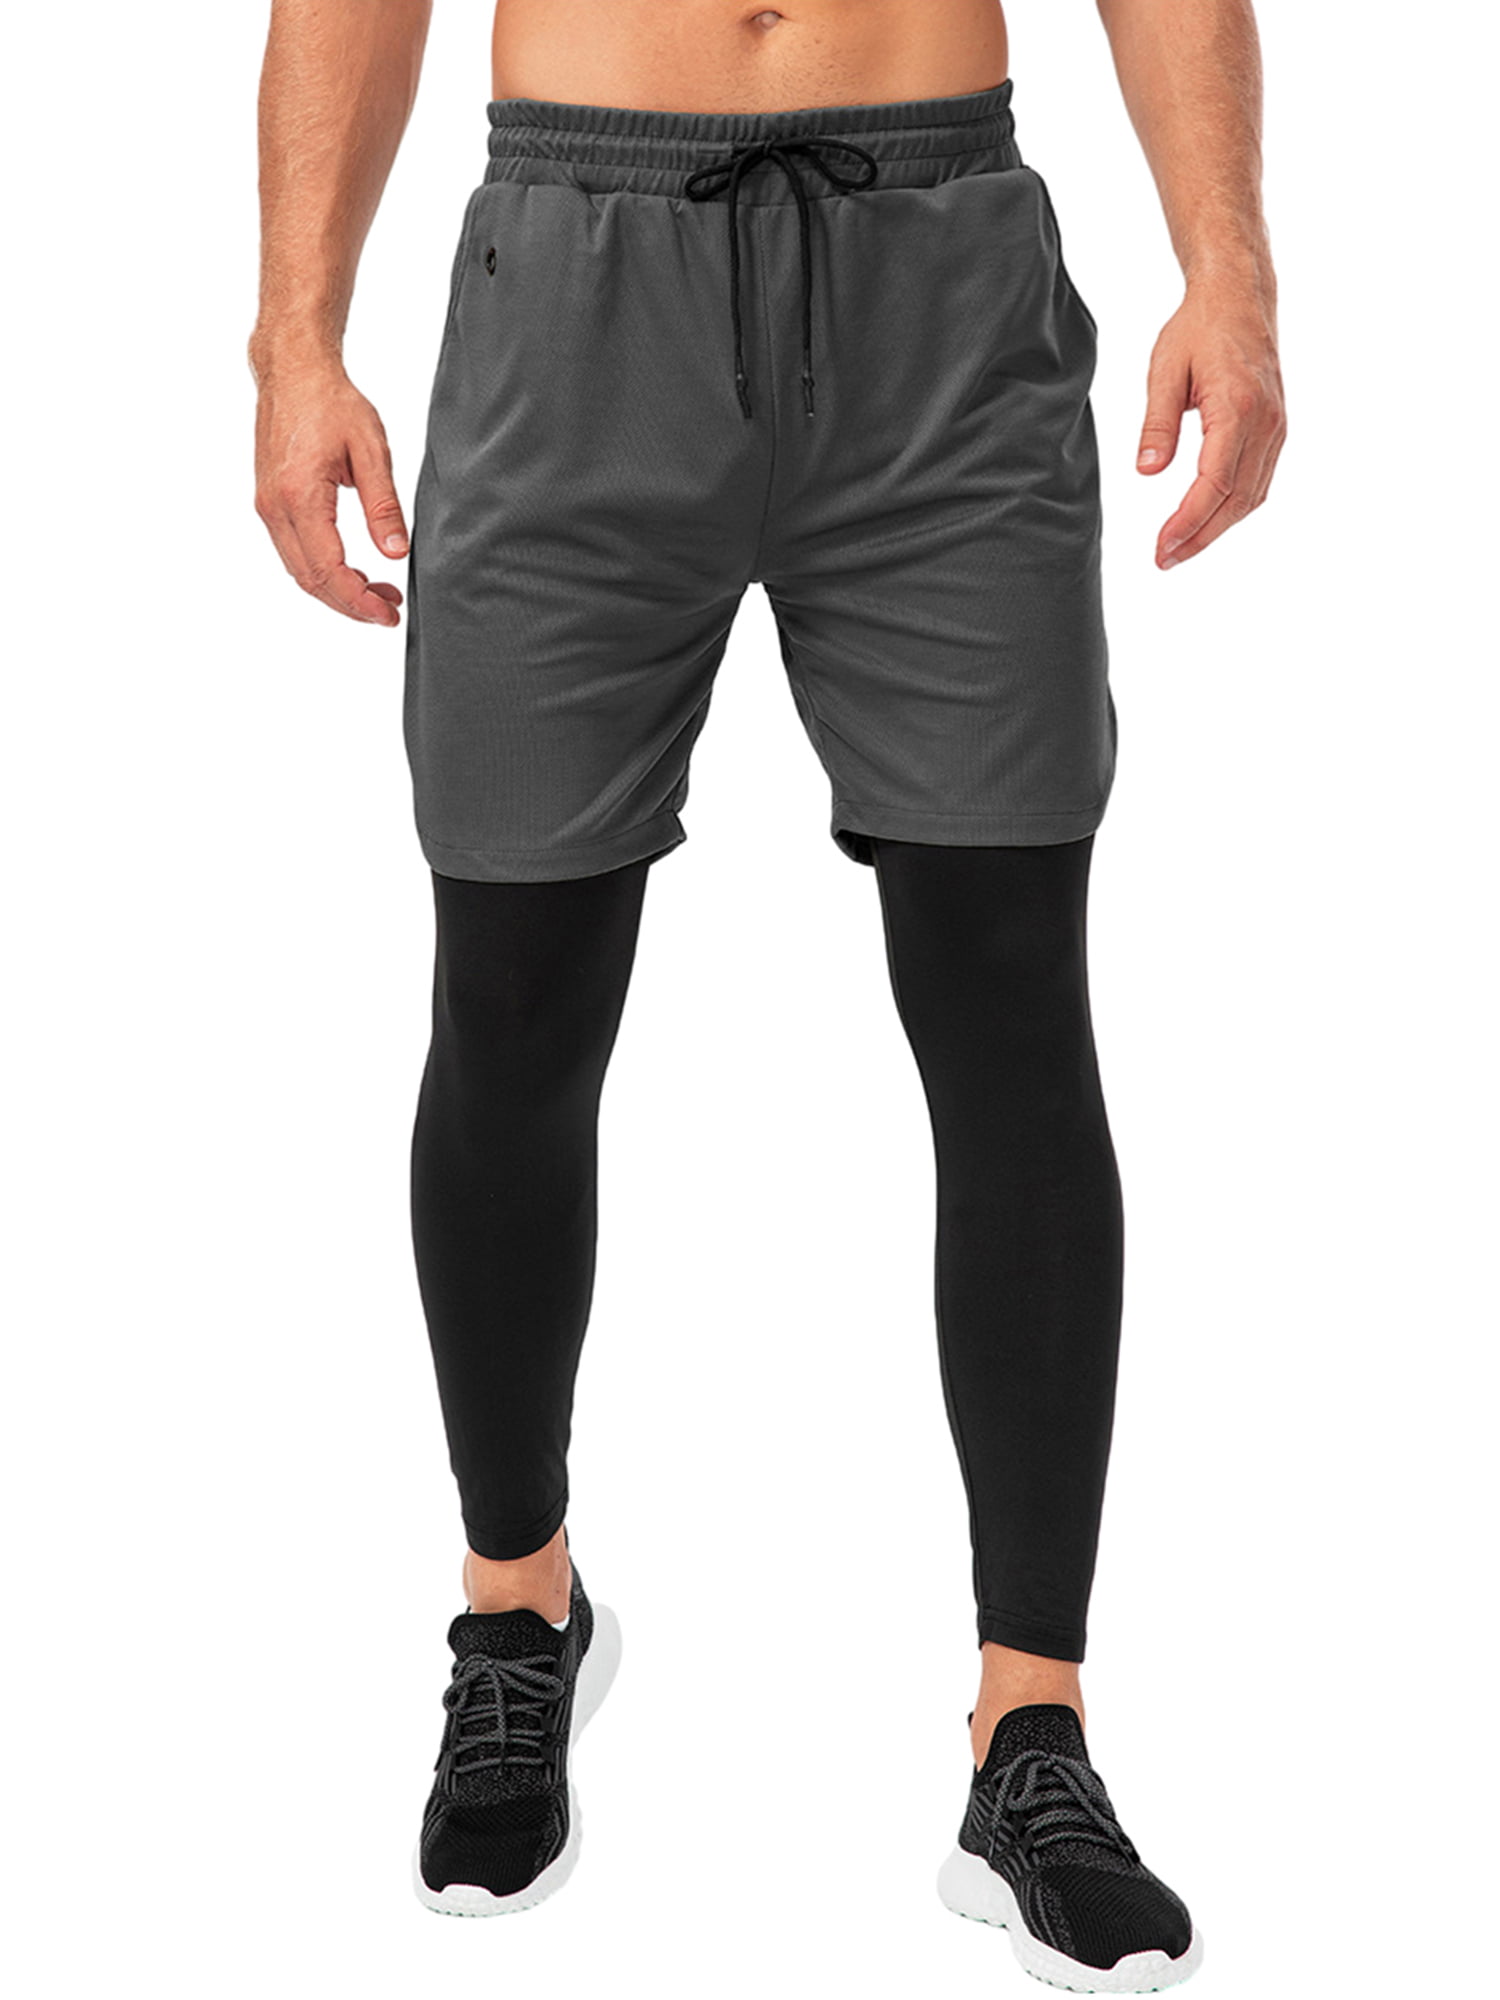 Men's 2 in 1 Active Pant Shorts Running Training Compression Pants with  Pocket